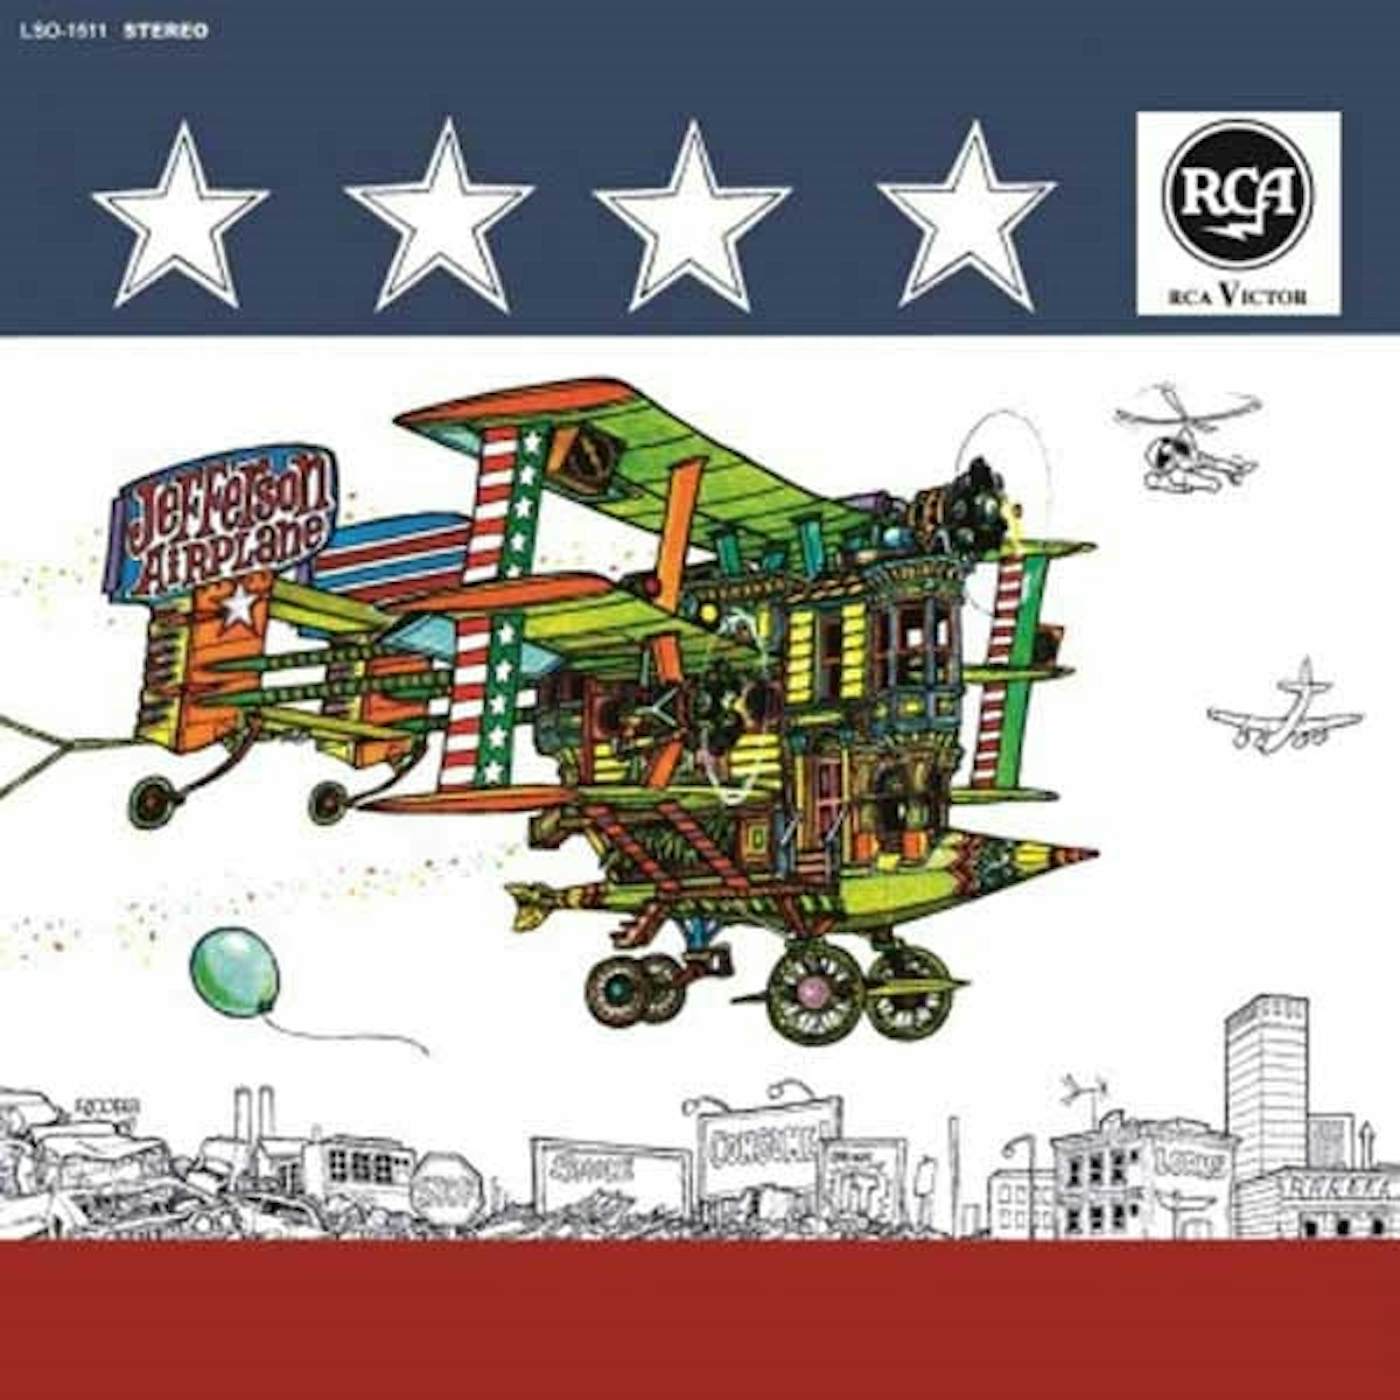 Jefferson Airplane LP - After Bathing At Baxter'S (Vinyl)